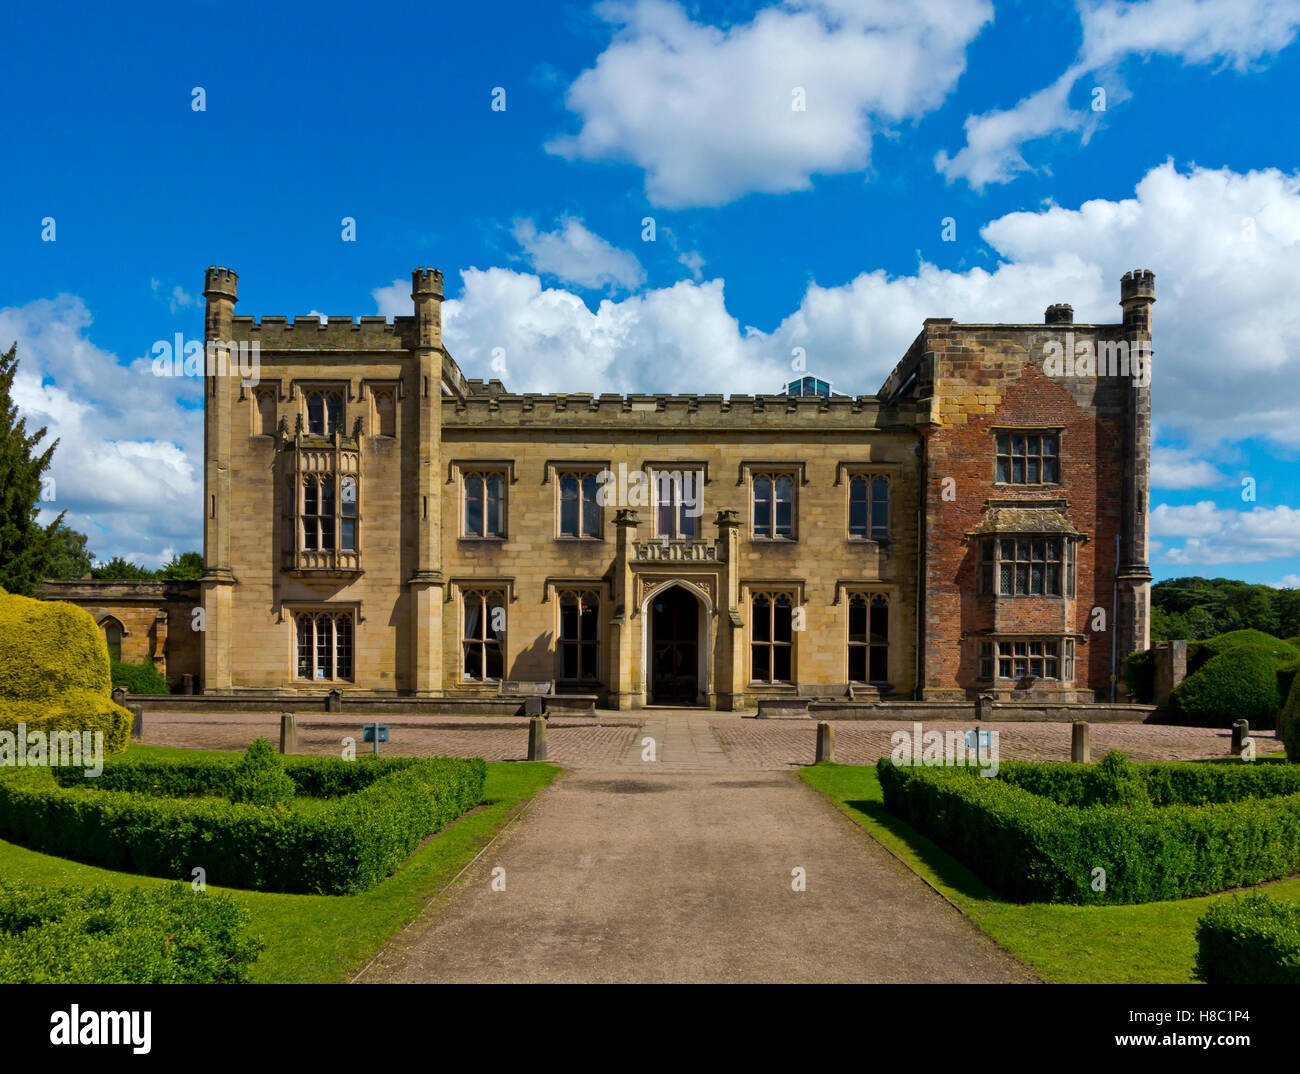 Elvaston Castle a gothic revival stately home in the grounds of Elvaston Country Park near Derby Derbyshire England UK Stock Photo